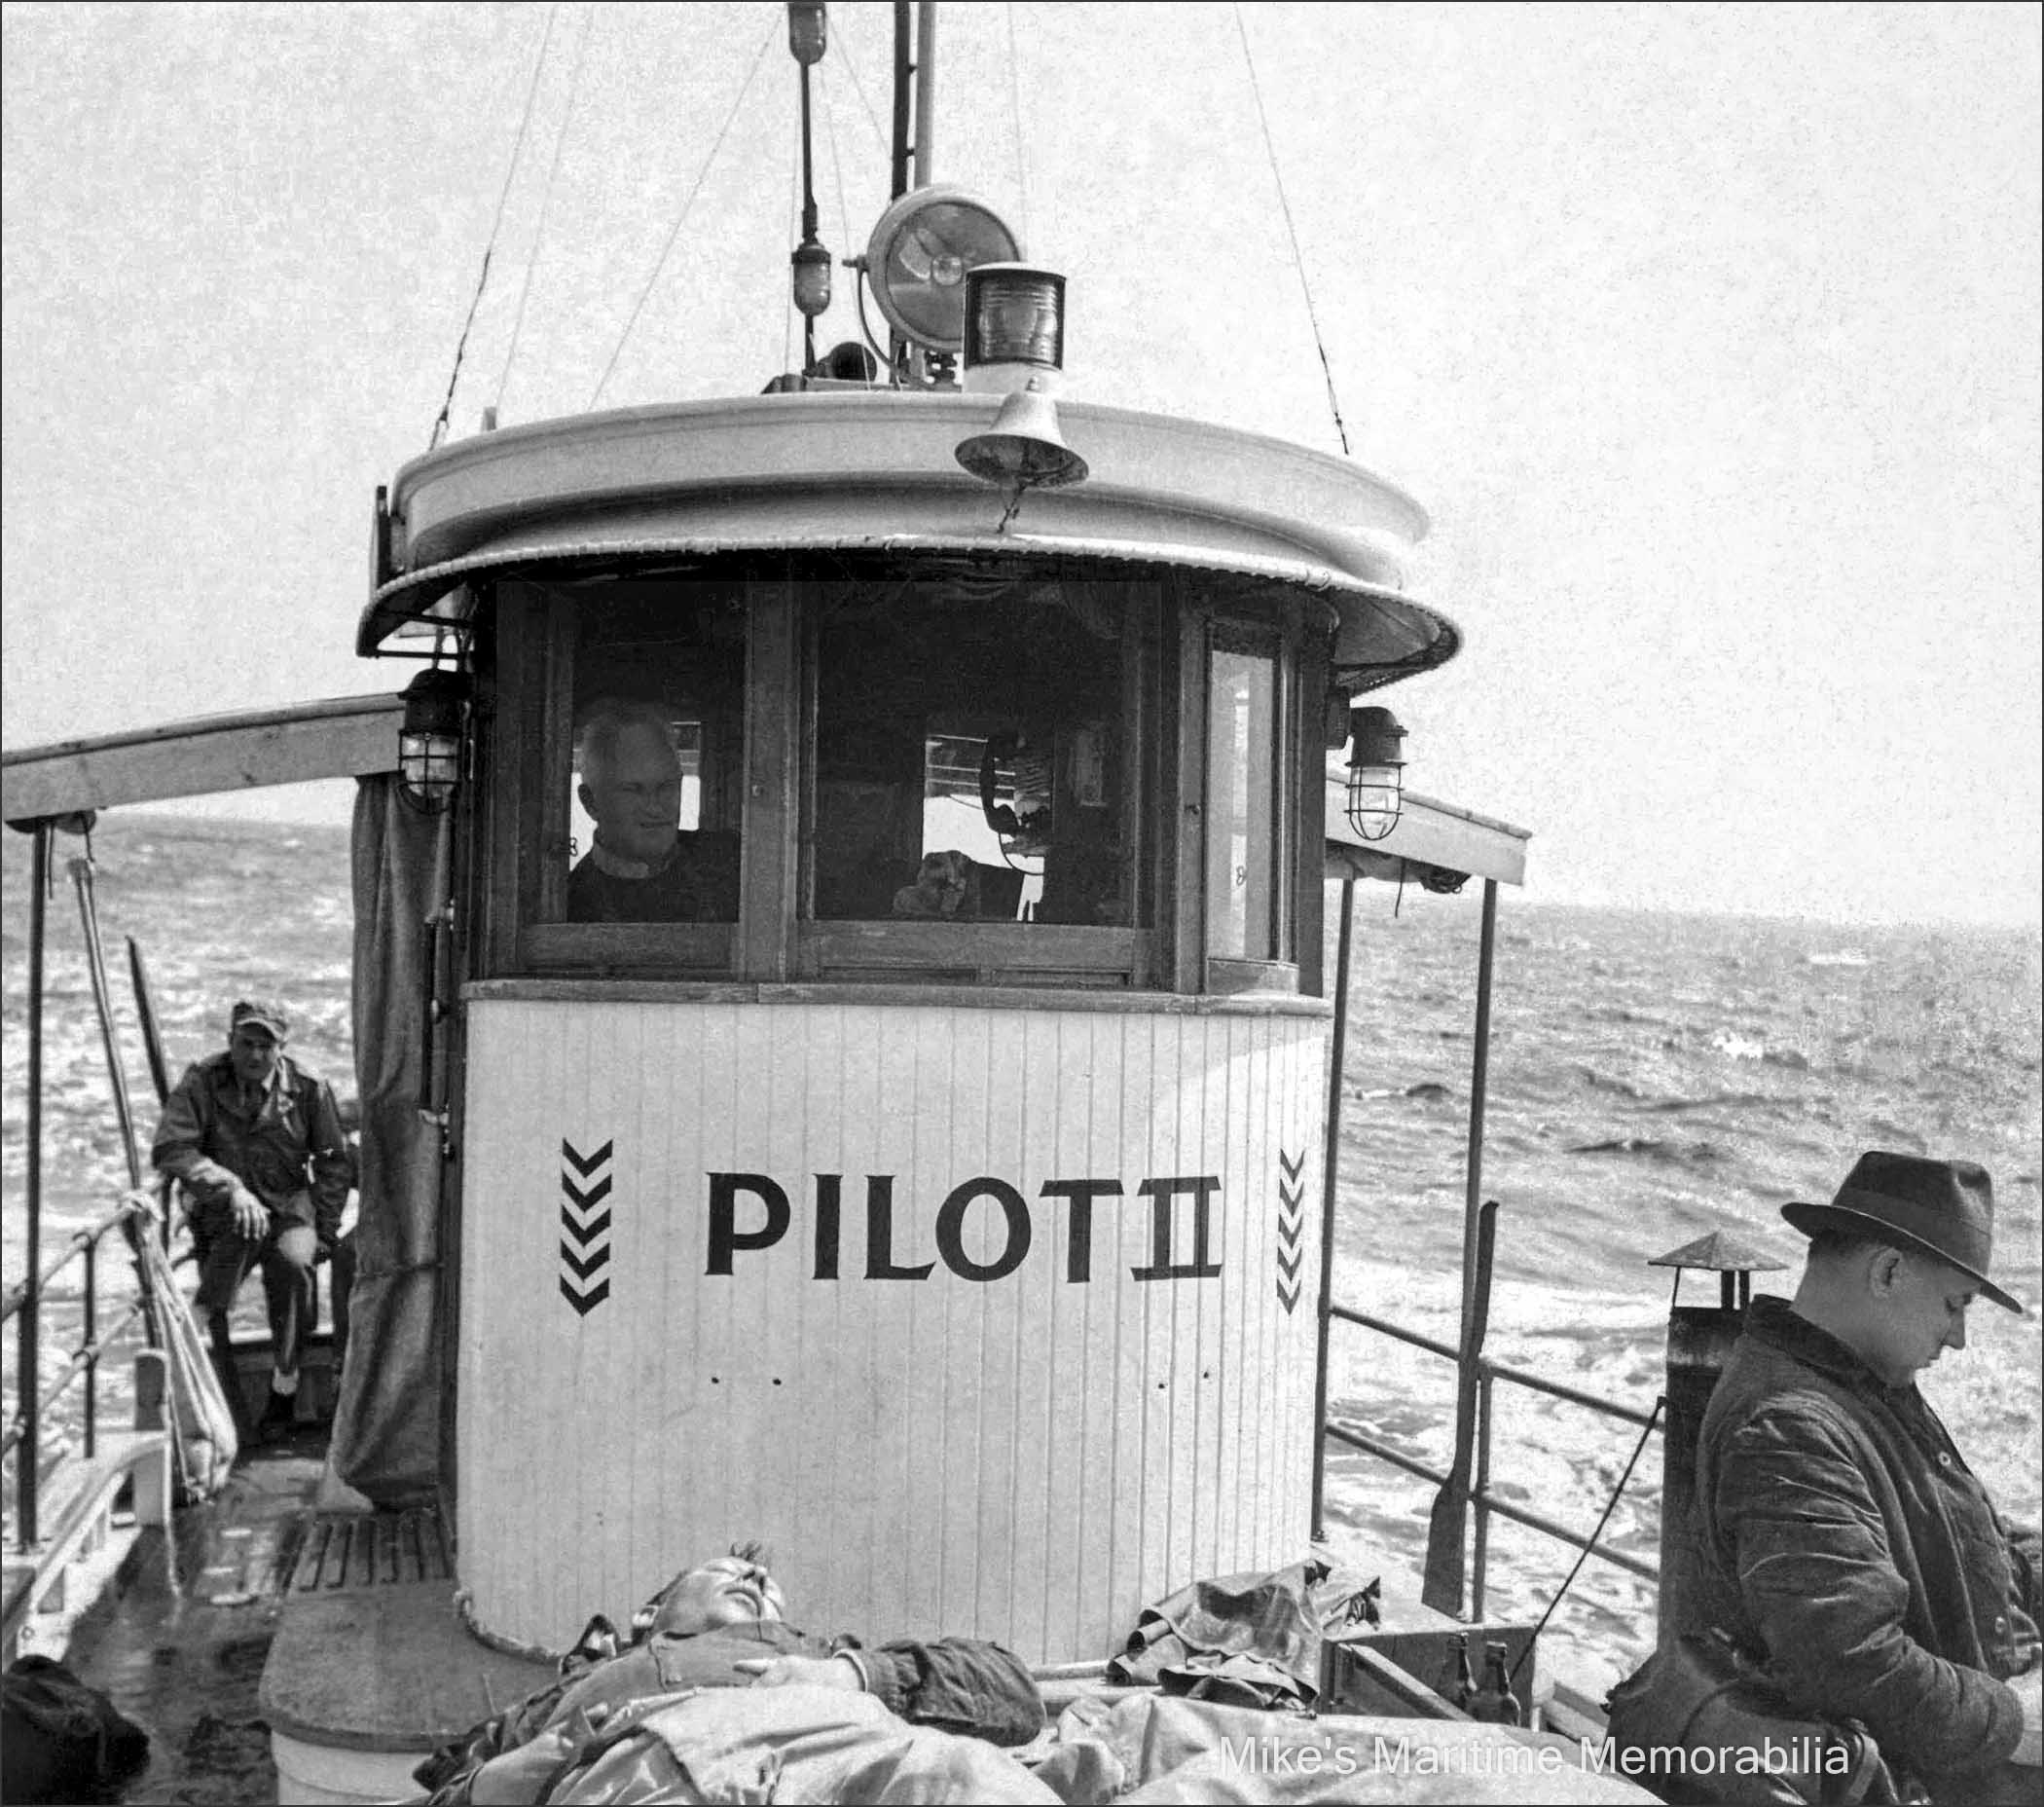 Captain Harry Phillips, PILOT II – 1947 Captain Harry Phillips is shown at the helm of his "PILOT II" while returning to Sheepshead Bay from a day of bottom fishing in October of 1947. Captain Phillips was a 'Master' inshore party boat captain who specialized in bottom and wreck fishing. This photo contains a wealth of details... A burlap bag of fish is tied to the rail near the stern, fishing rods are put away in their canvas bags, a spray curtain is hanging by the wheelhouse, the decks are scrubbed and still wet, a couple of bottles of beer still remain unopened, and the angler at the bottom is taking a quick snooze. Each of the chevrons painted on the wheelhouse denotes a year of coastal patrol service by the boat during World War II. Also notice the neat radiotelephone handset in the wheelhouse.